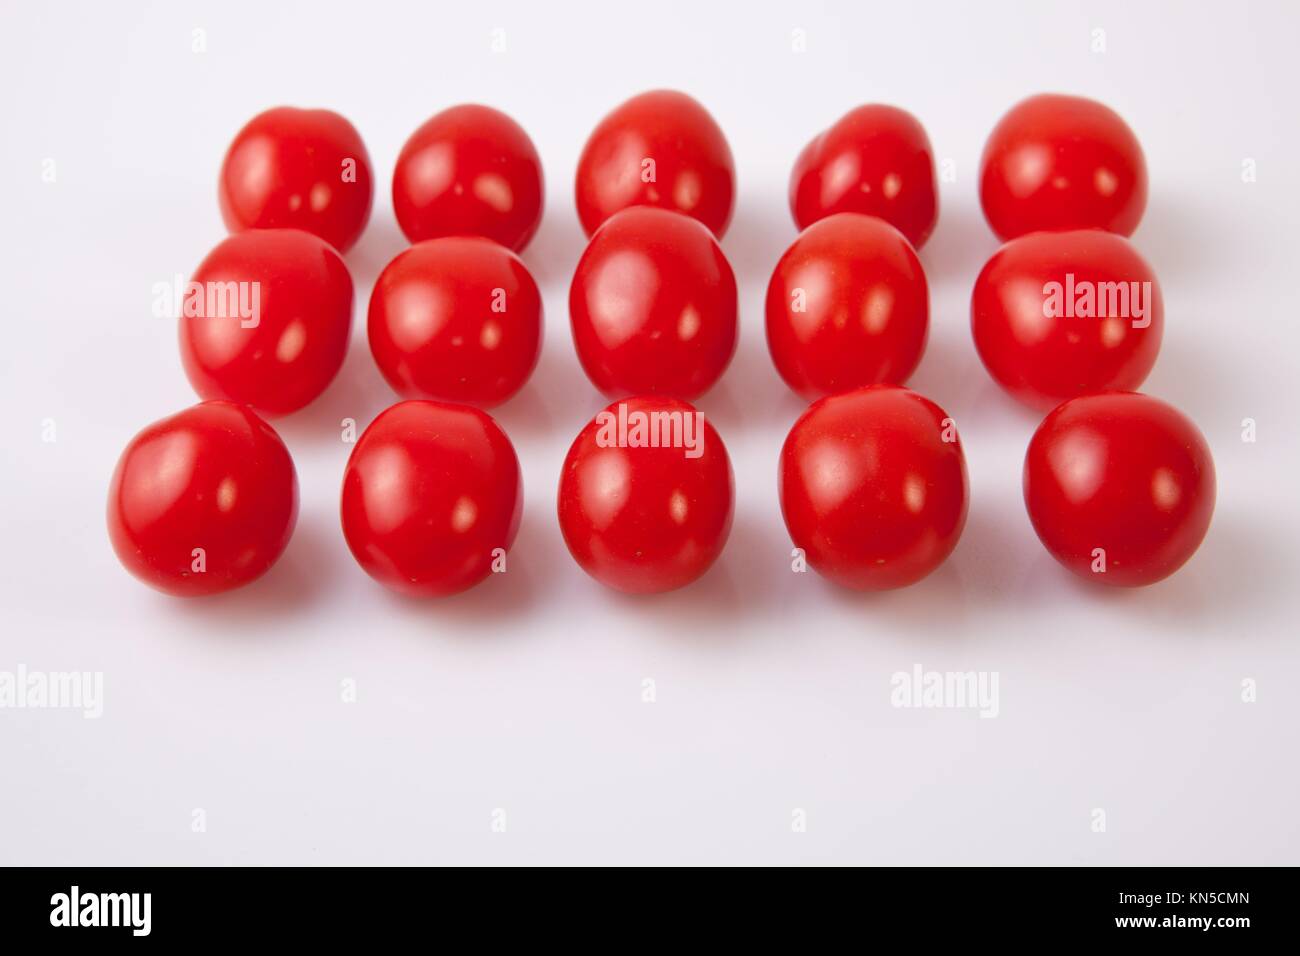 Red shiny cherry tomatoes. Isolated over white background. Stock Photo